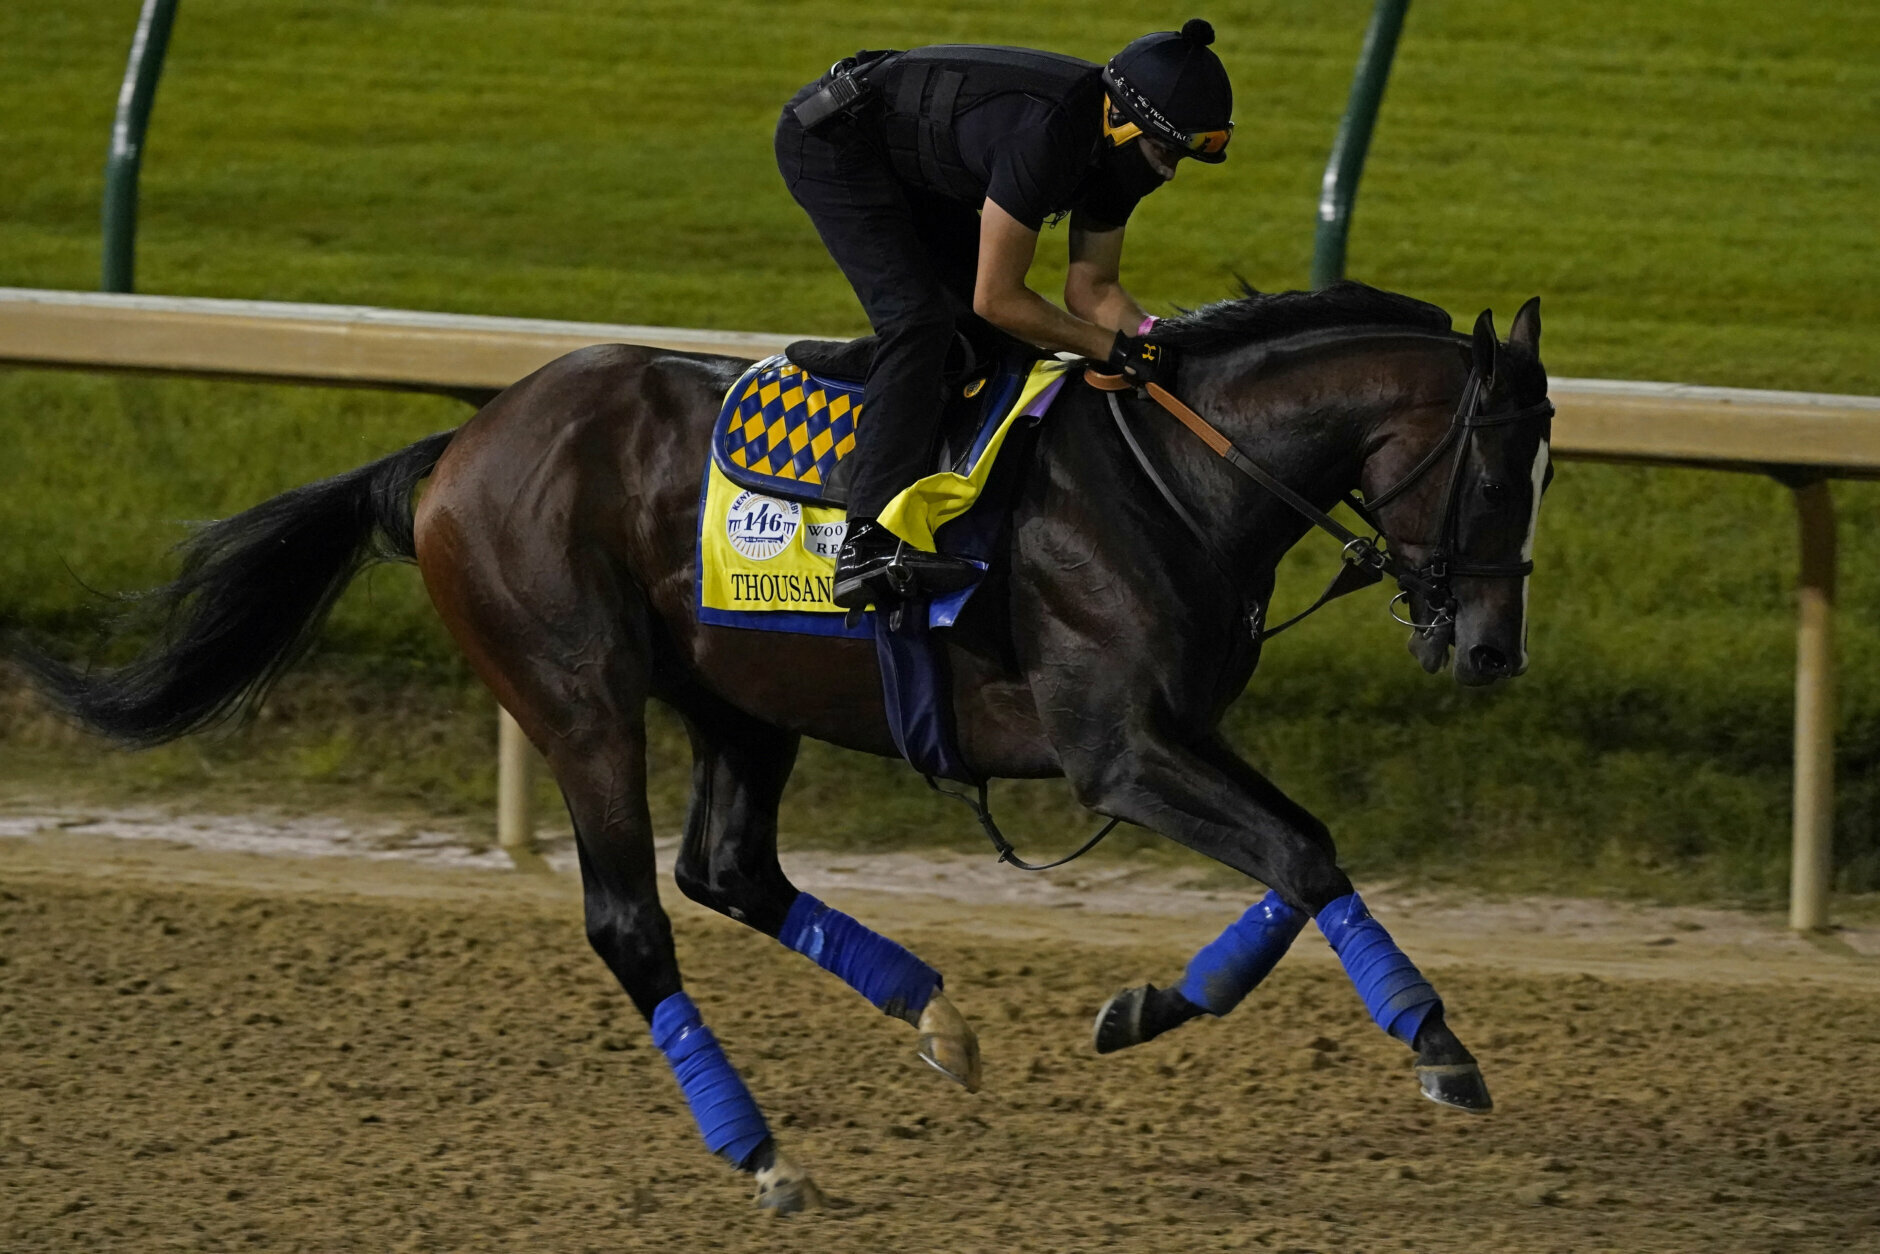 Kentucky Derby entry Thousand Words runs during an early morning workout at Churchill Downs, Friday, Sept. 4, 2020, in Louisville, Ky. The Kentucky Derby is scheduled for Saturday, Sept. 5th. (AP Photo/Charlie Riedel)